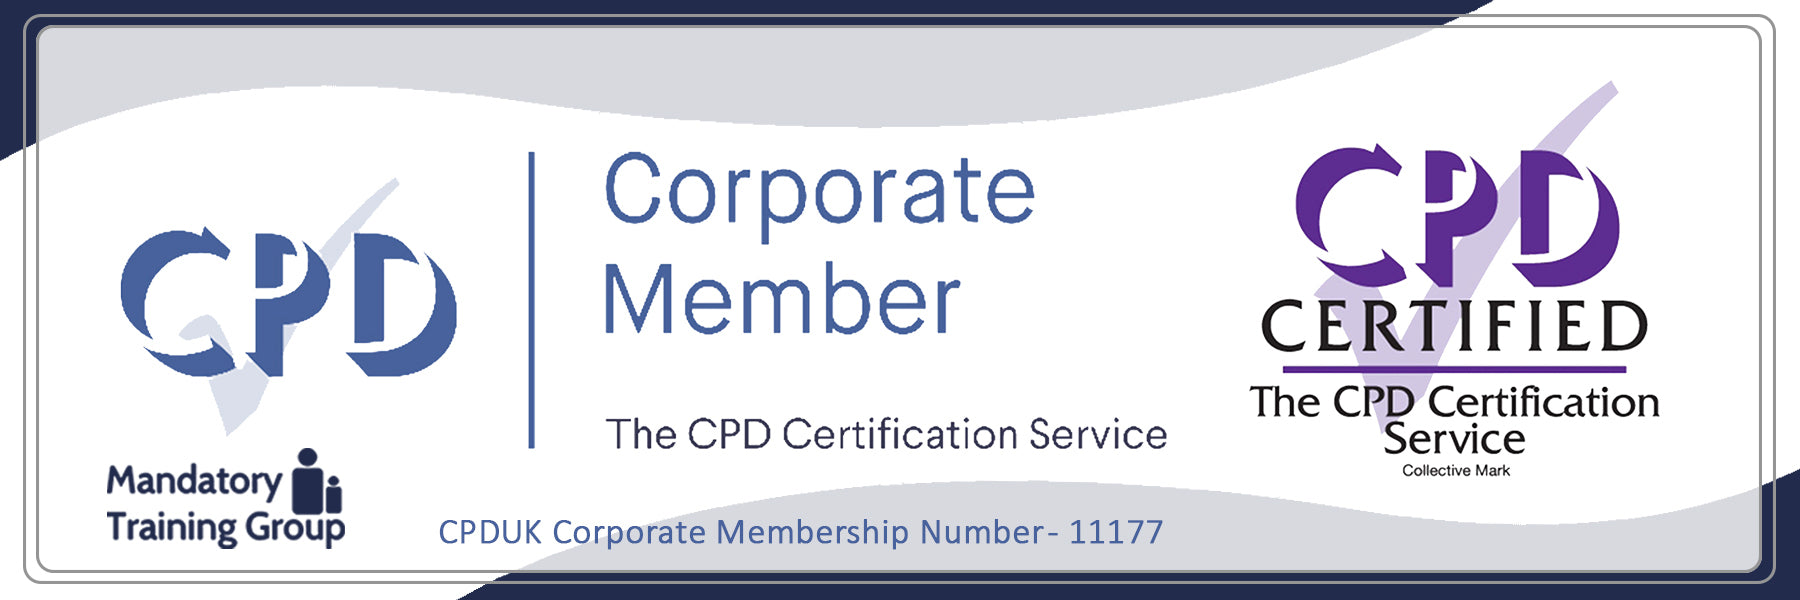 Care Certificate Standard 12 + Train the Trainer + Trainer Pack - CPDUK Accredited - The Mandatory Training Group UK -